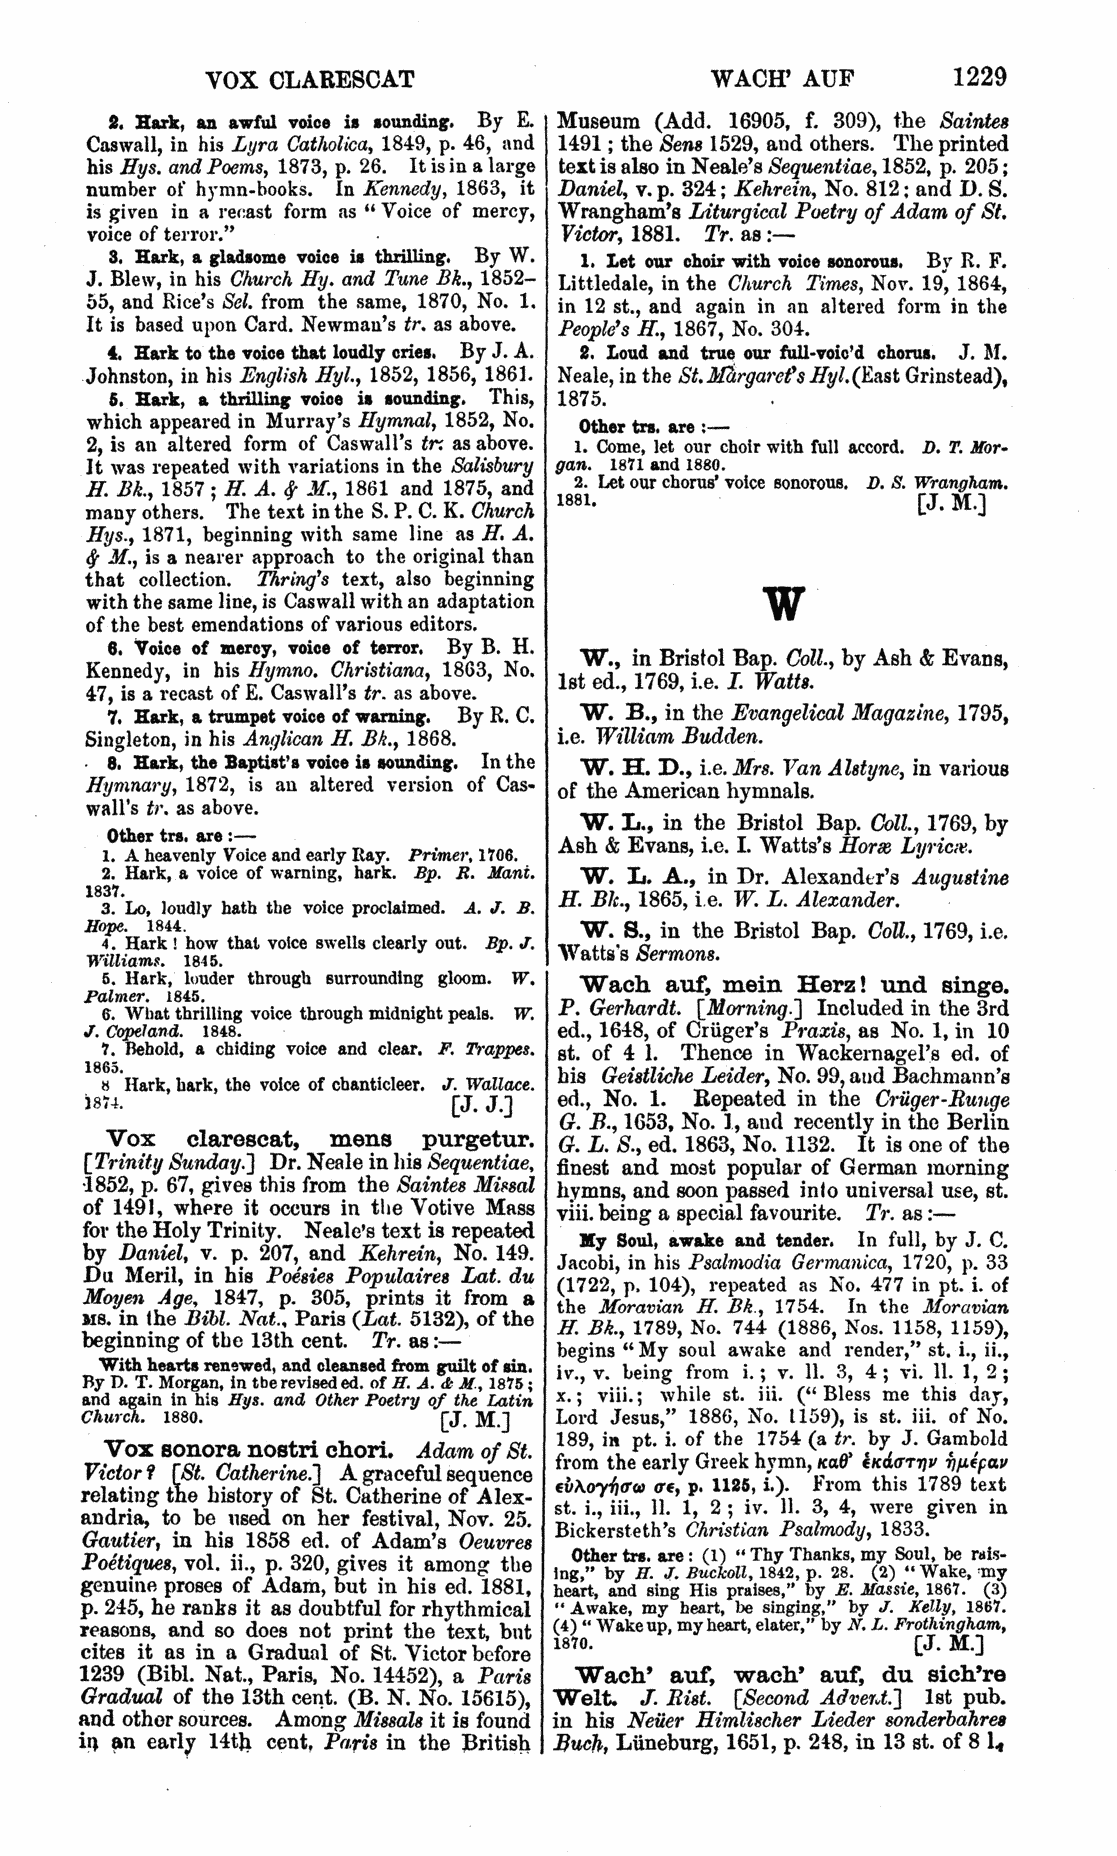 Image of page 1229